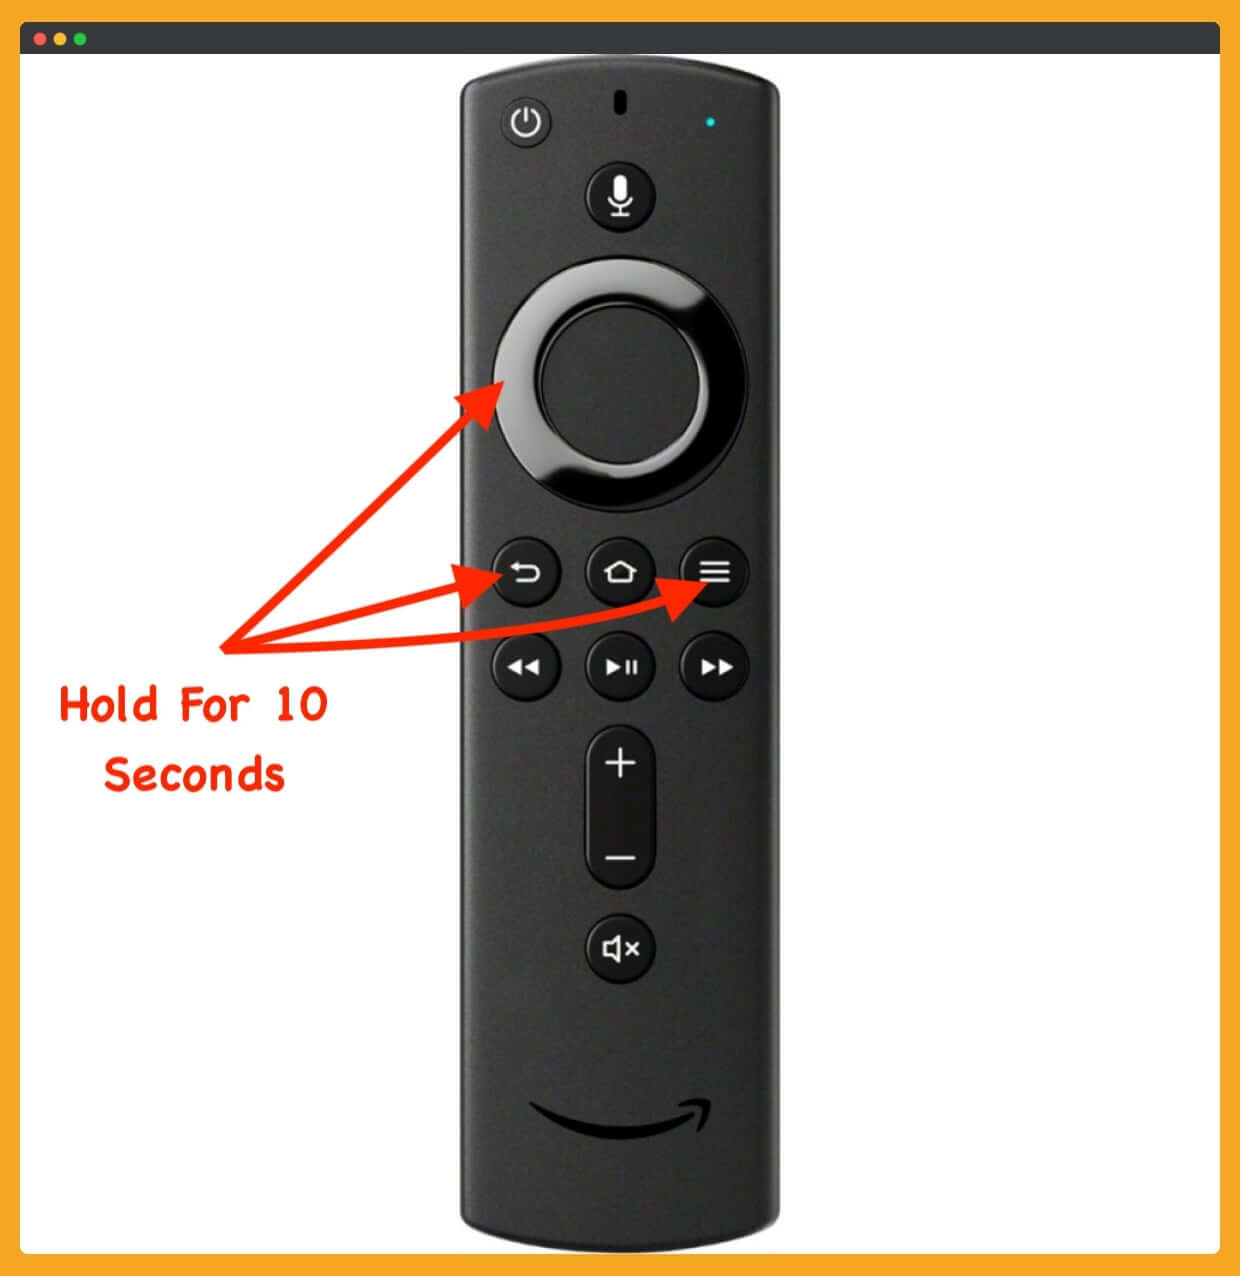 Amazon-Firestick-Remote-Not-Working-Solution